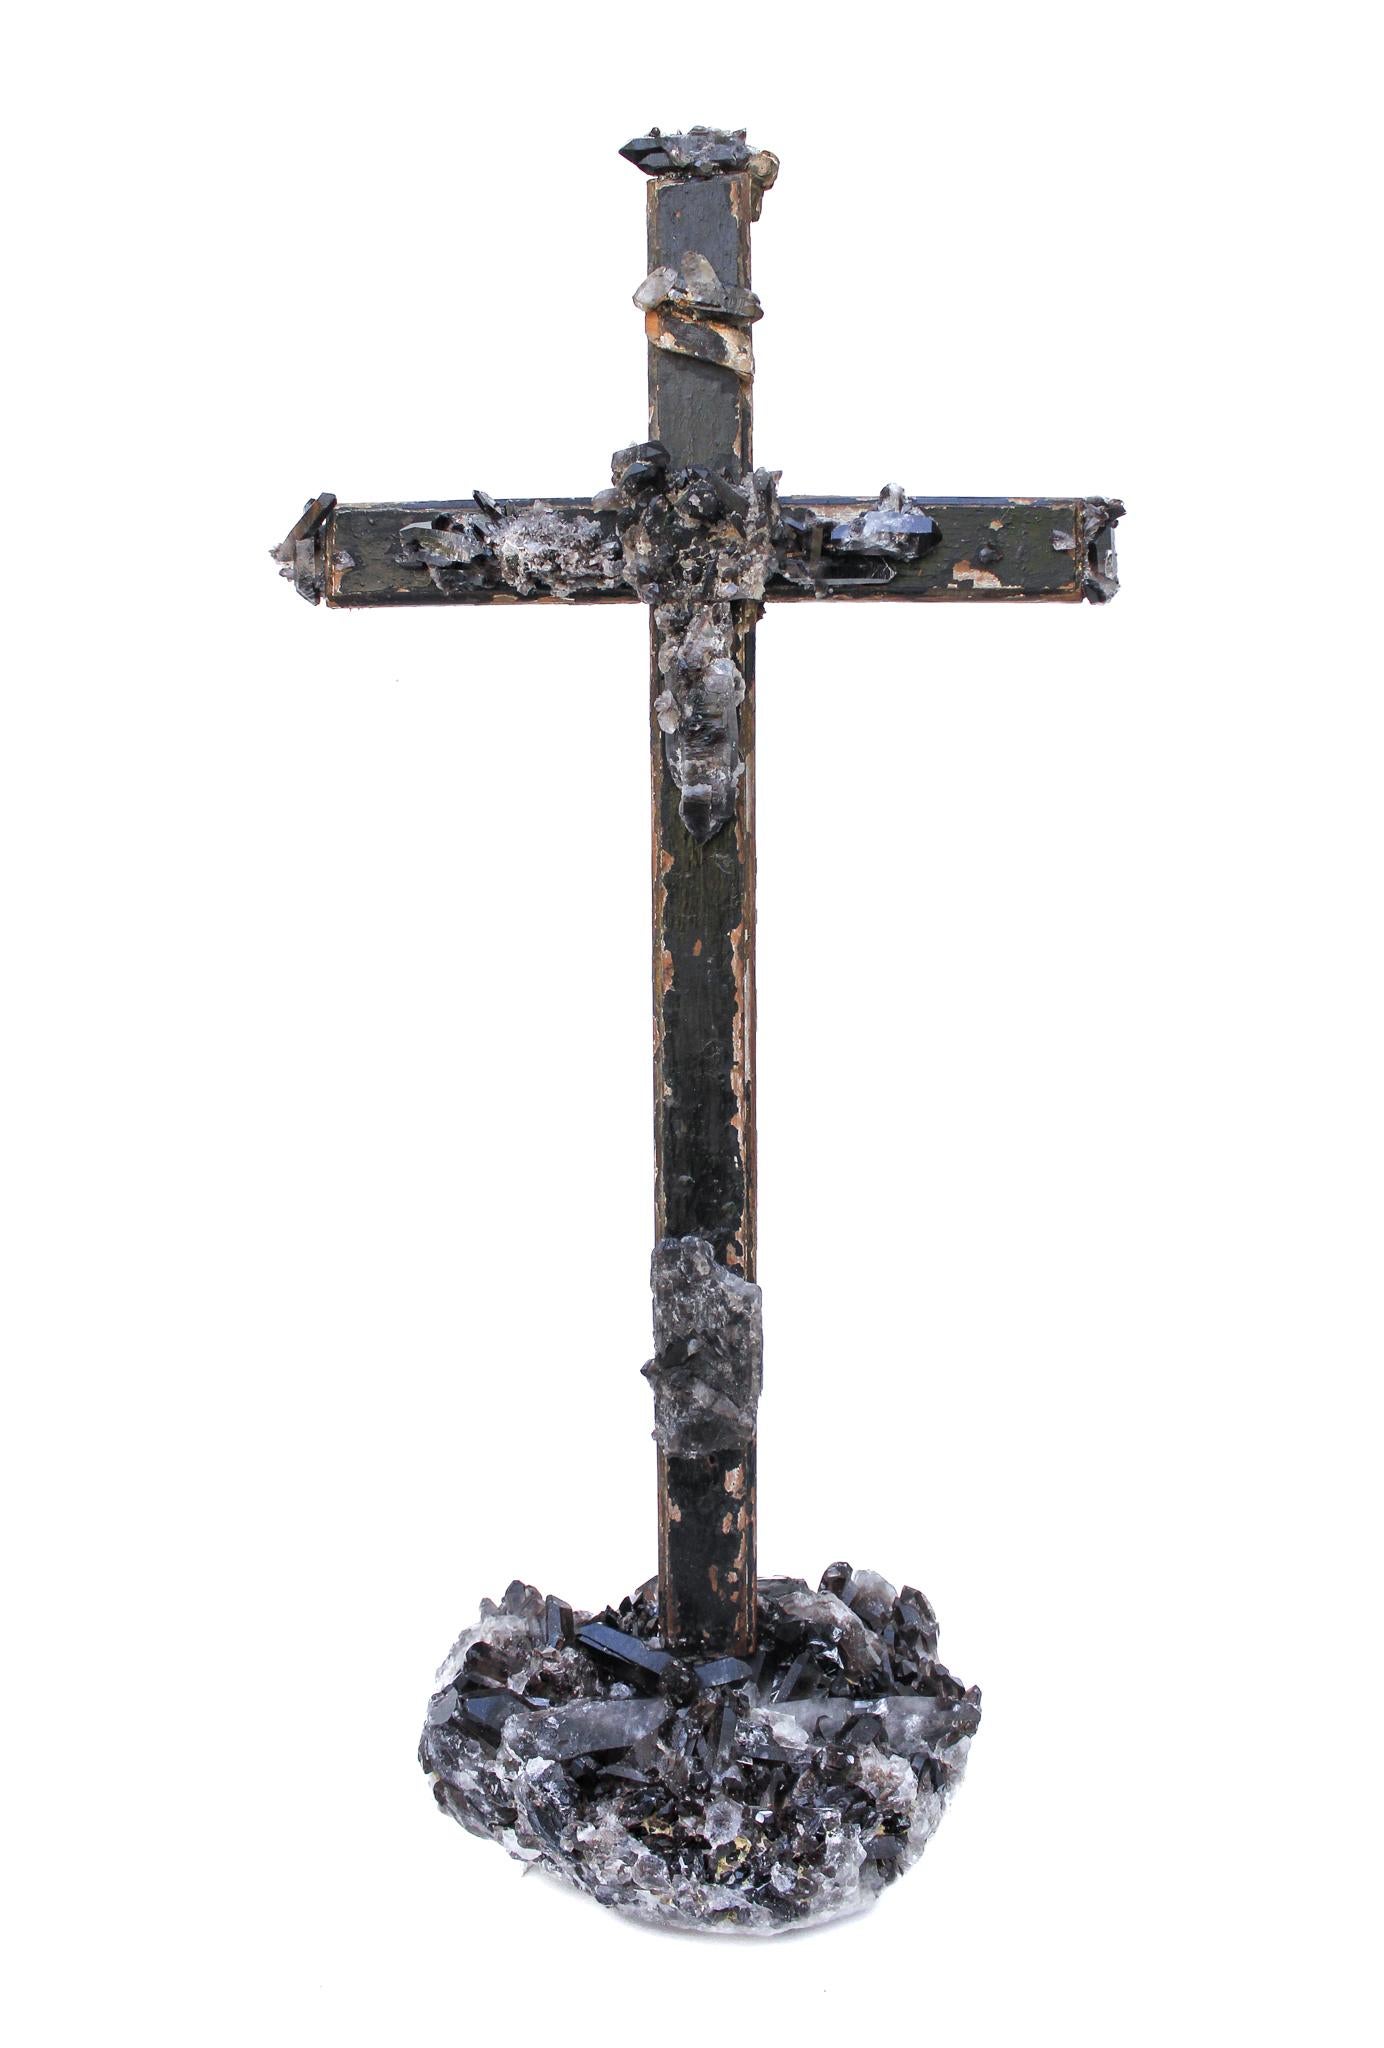 17th century Italian cross adorned with black crystal quartz points and mounted on a black crystal quartz cluster. 

The black crystals have been applied onto the cross to look as though naturally grew on the piece. The cross as a result looks